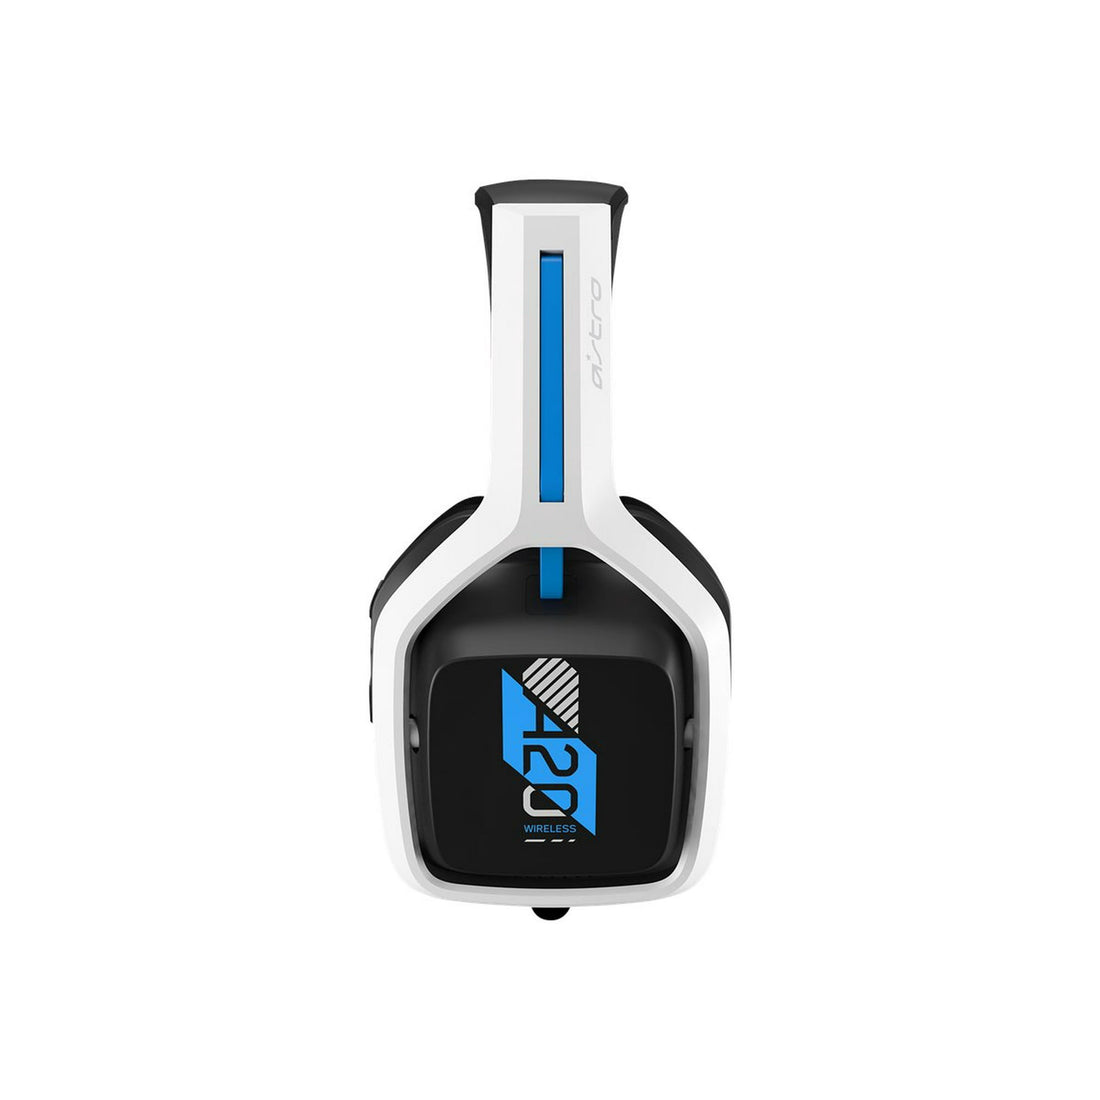 Astro A20 Gen 2 Wireless Gaming Headset for Xbox Series and PC - White/Blue  (New)